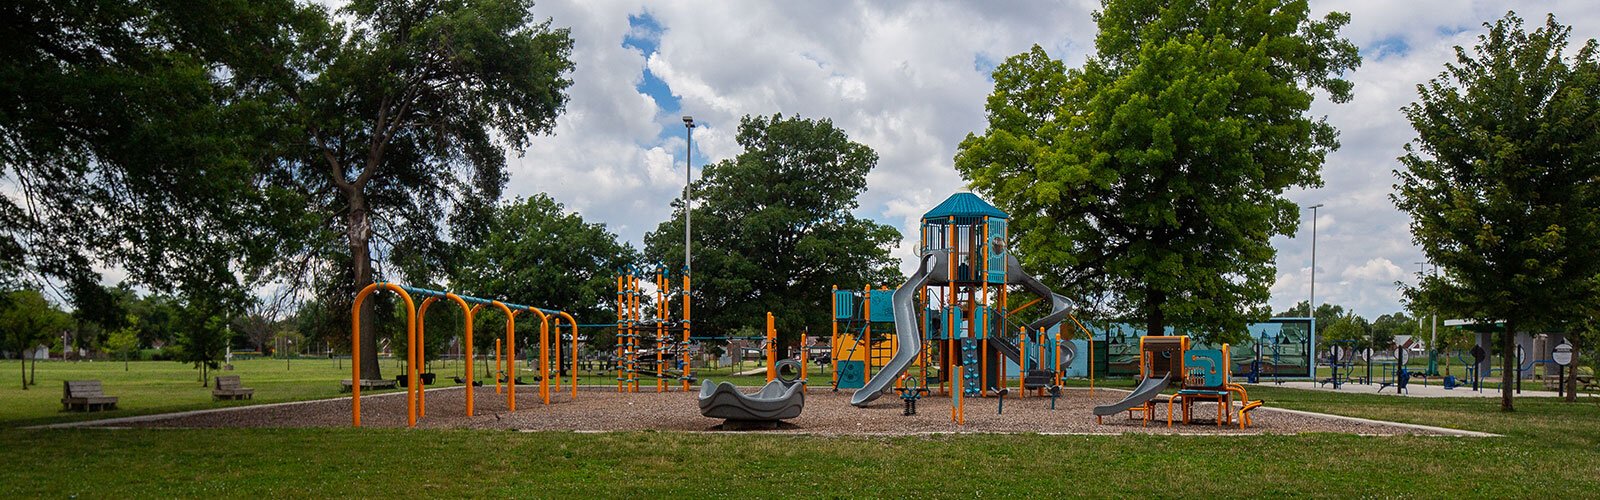 Playscape at Stein Park